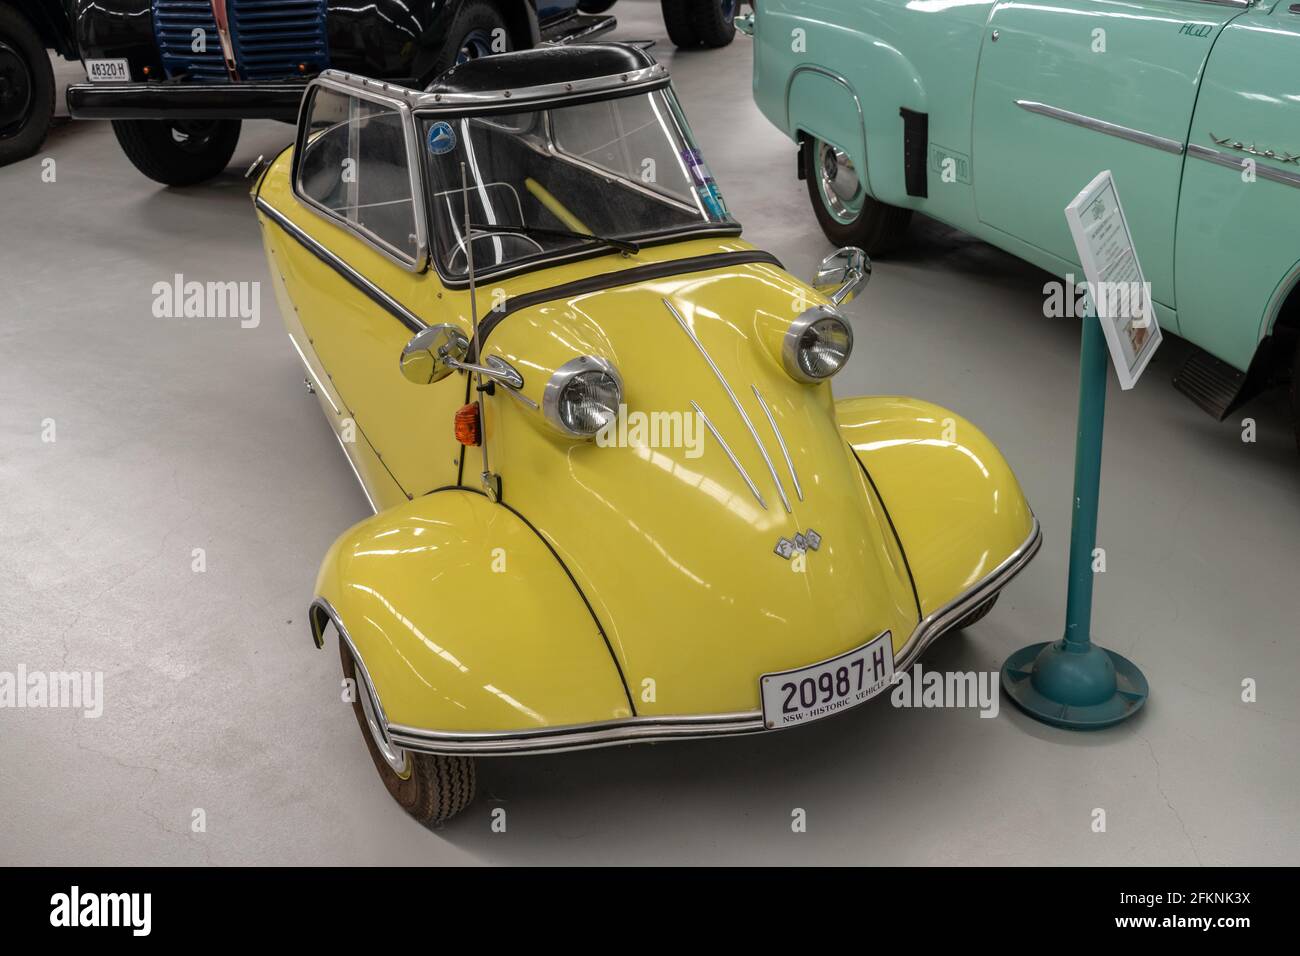 Messerschmitt KR200 3-Wheeler Microcar on display at the National Transport Museum in Inverell, New South Wales, Australia Stock Photo